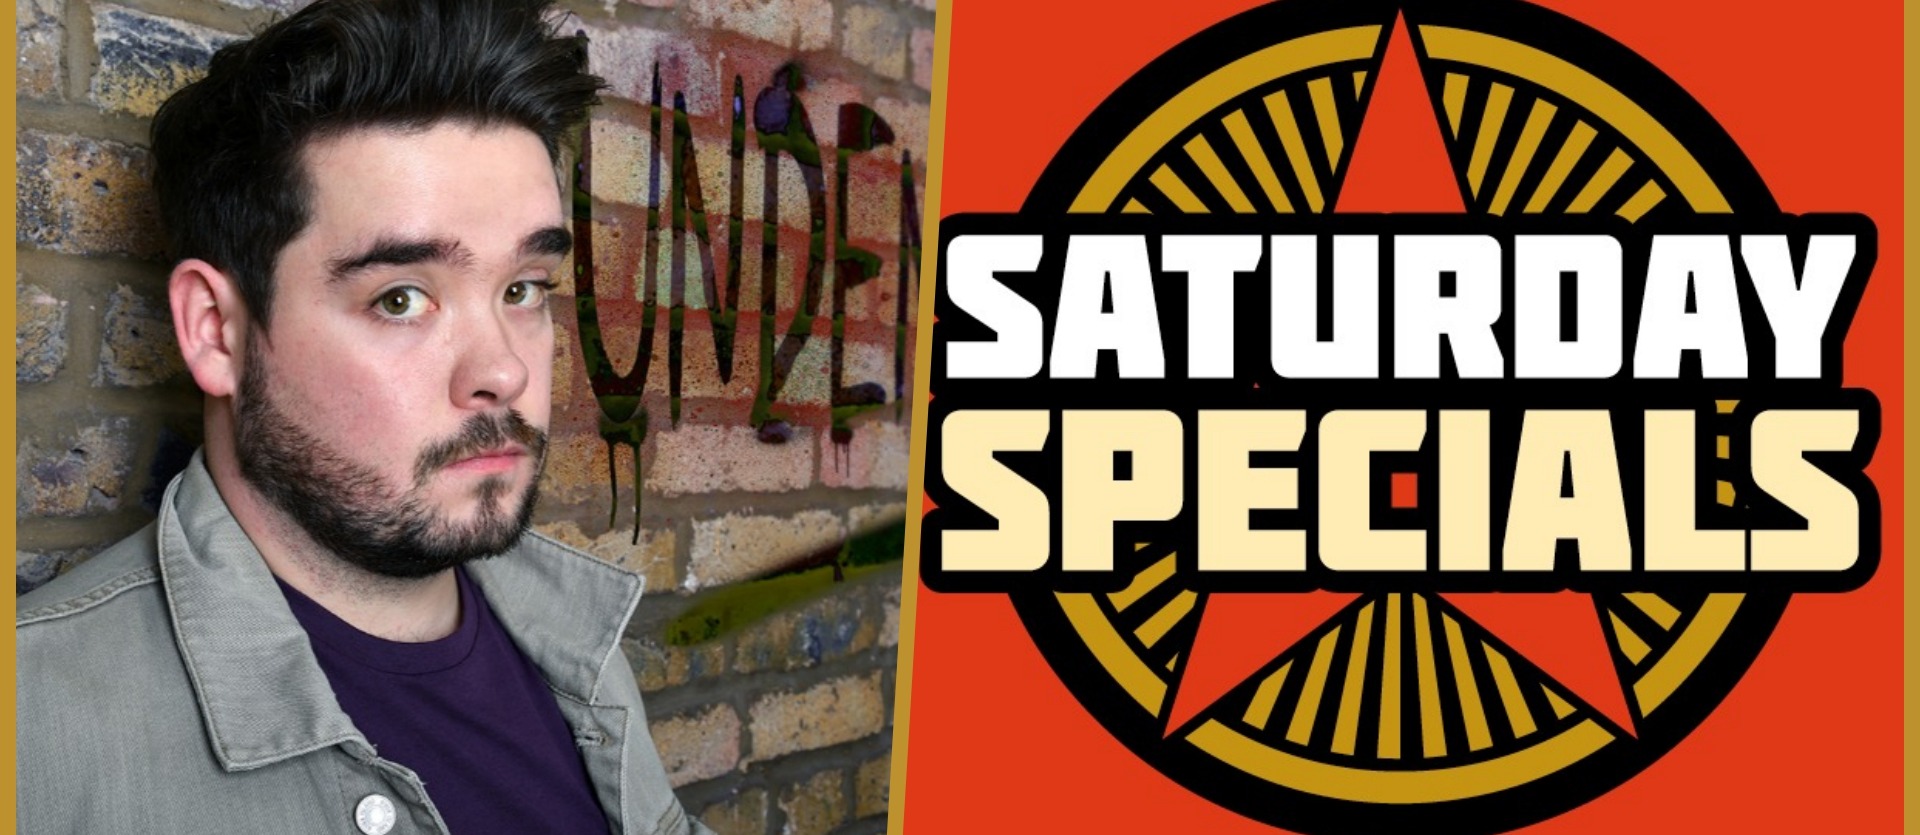 Just The Tonic's Full Saturday Double Show Special 